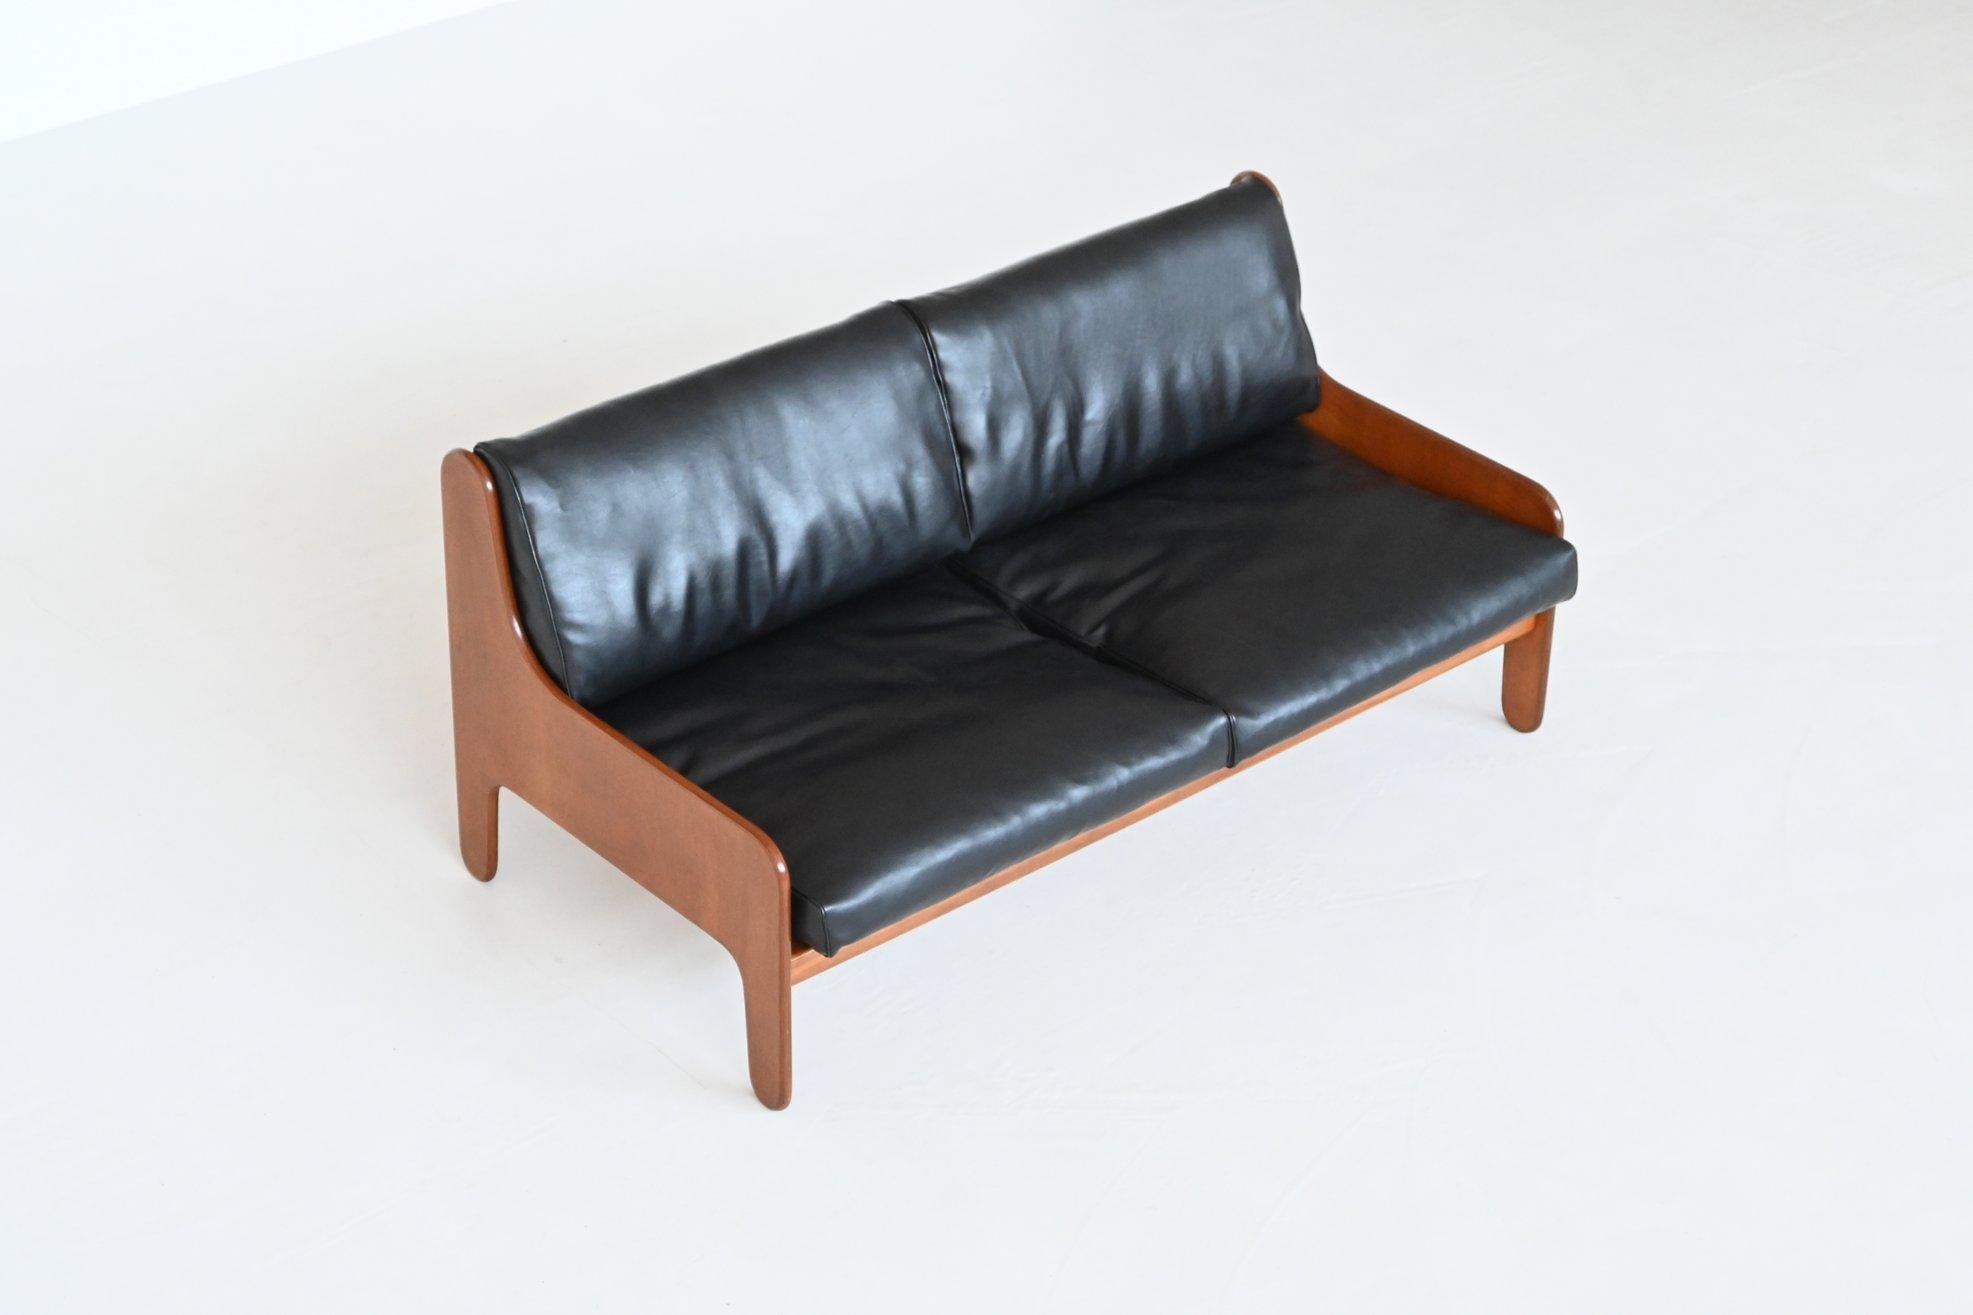 Stunning shaped lounge sofa model Baronet designed Marco Zanuso and manufactured by Arflex, Italy 1964. This amazing sofa has a very nice teak plywood frame and the cushions are covered with high-quality black faux leather. The plywood frame is a